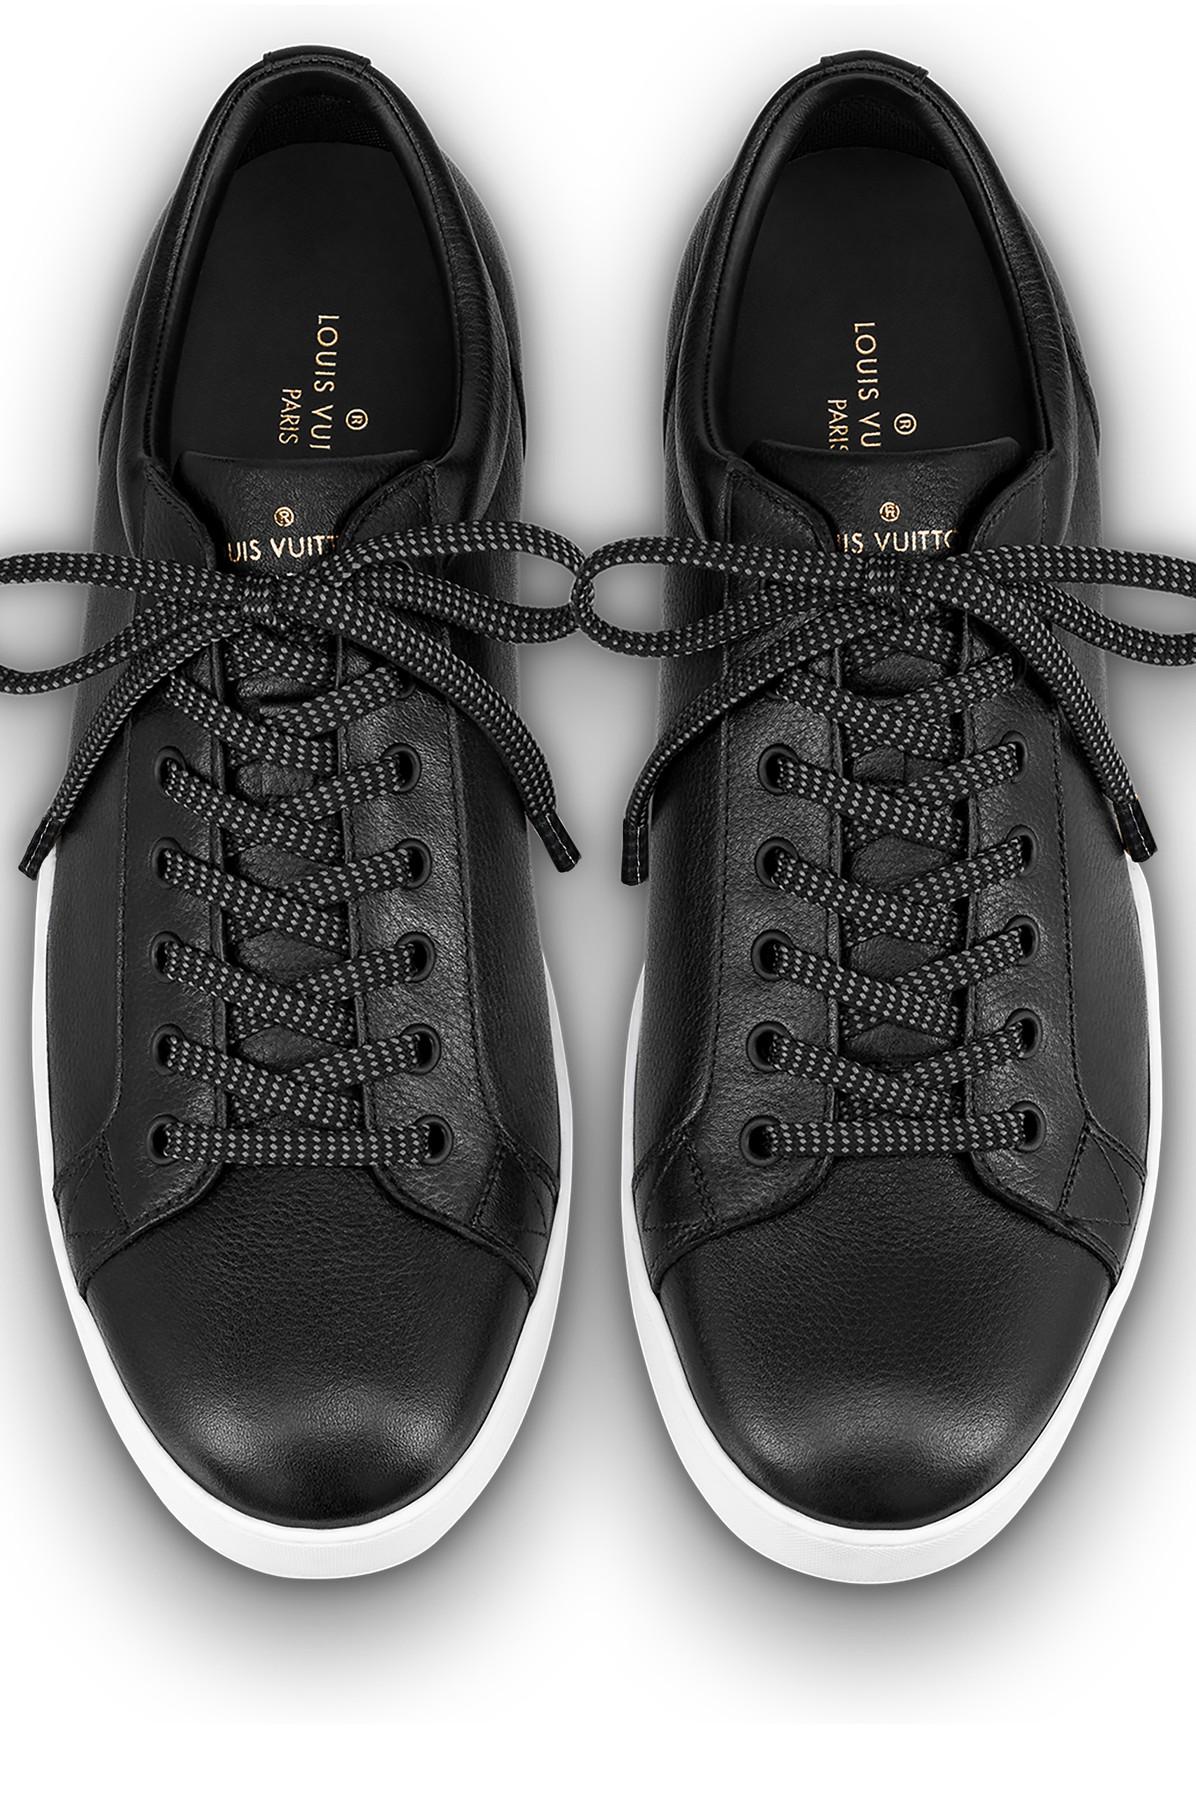 Buy Louis Vuitton Concorde Shoes: New Releases & Iconic Styles